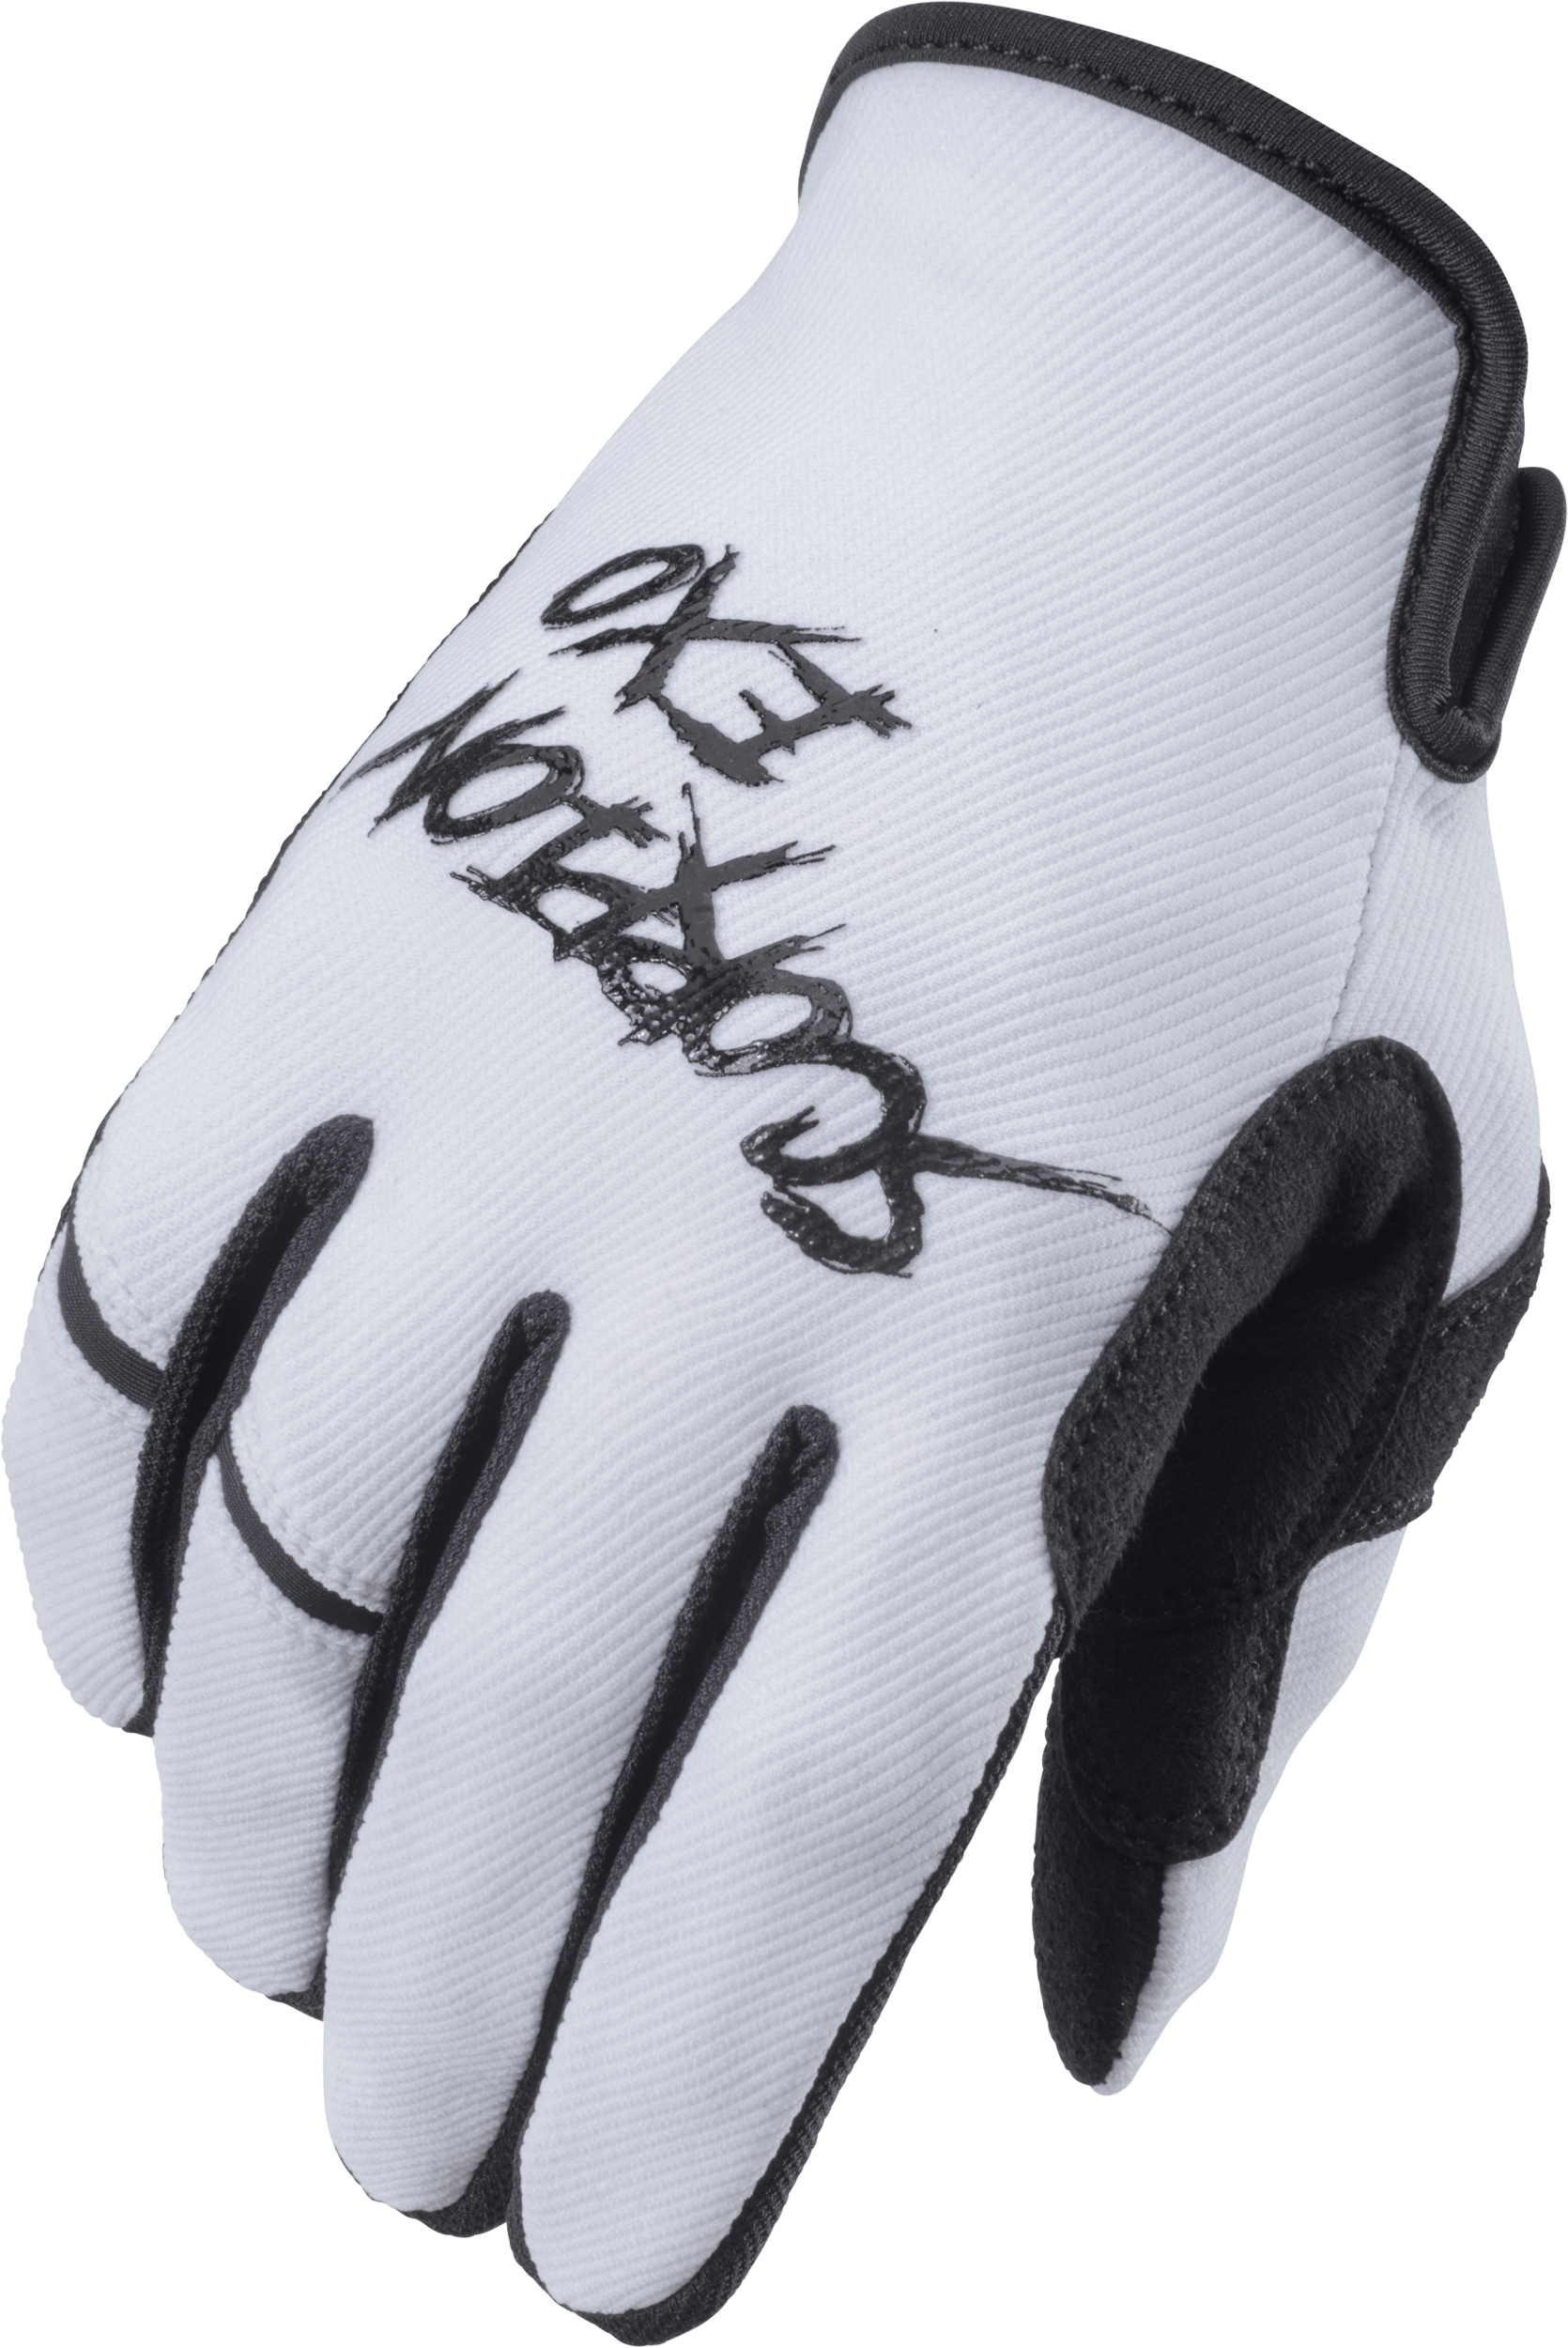 Western Powersports Gloves White/Black / 2X-Large Air-Stretch Grind Gloves by Scorpion Exo G46-057